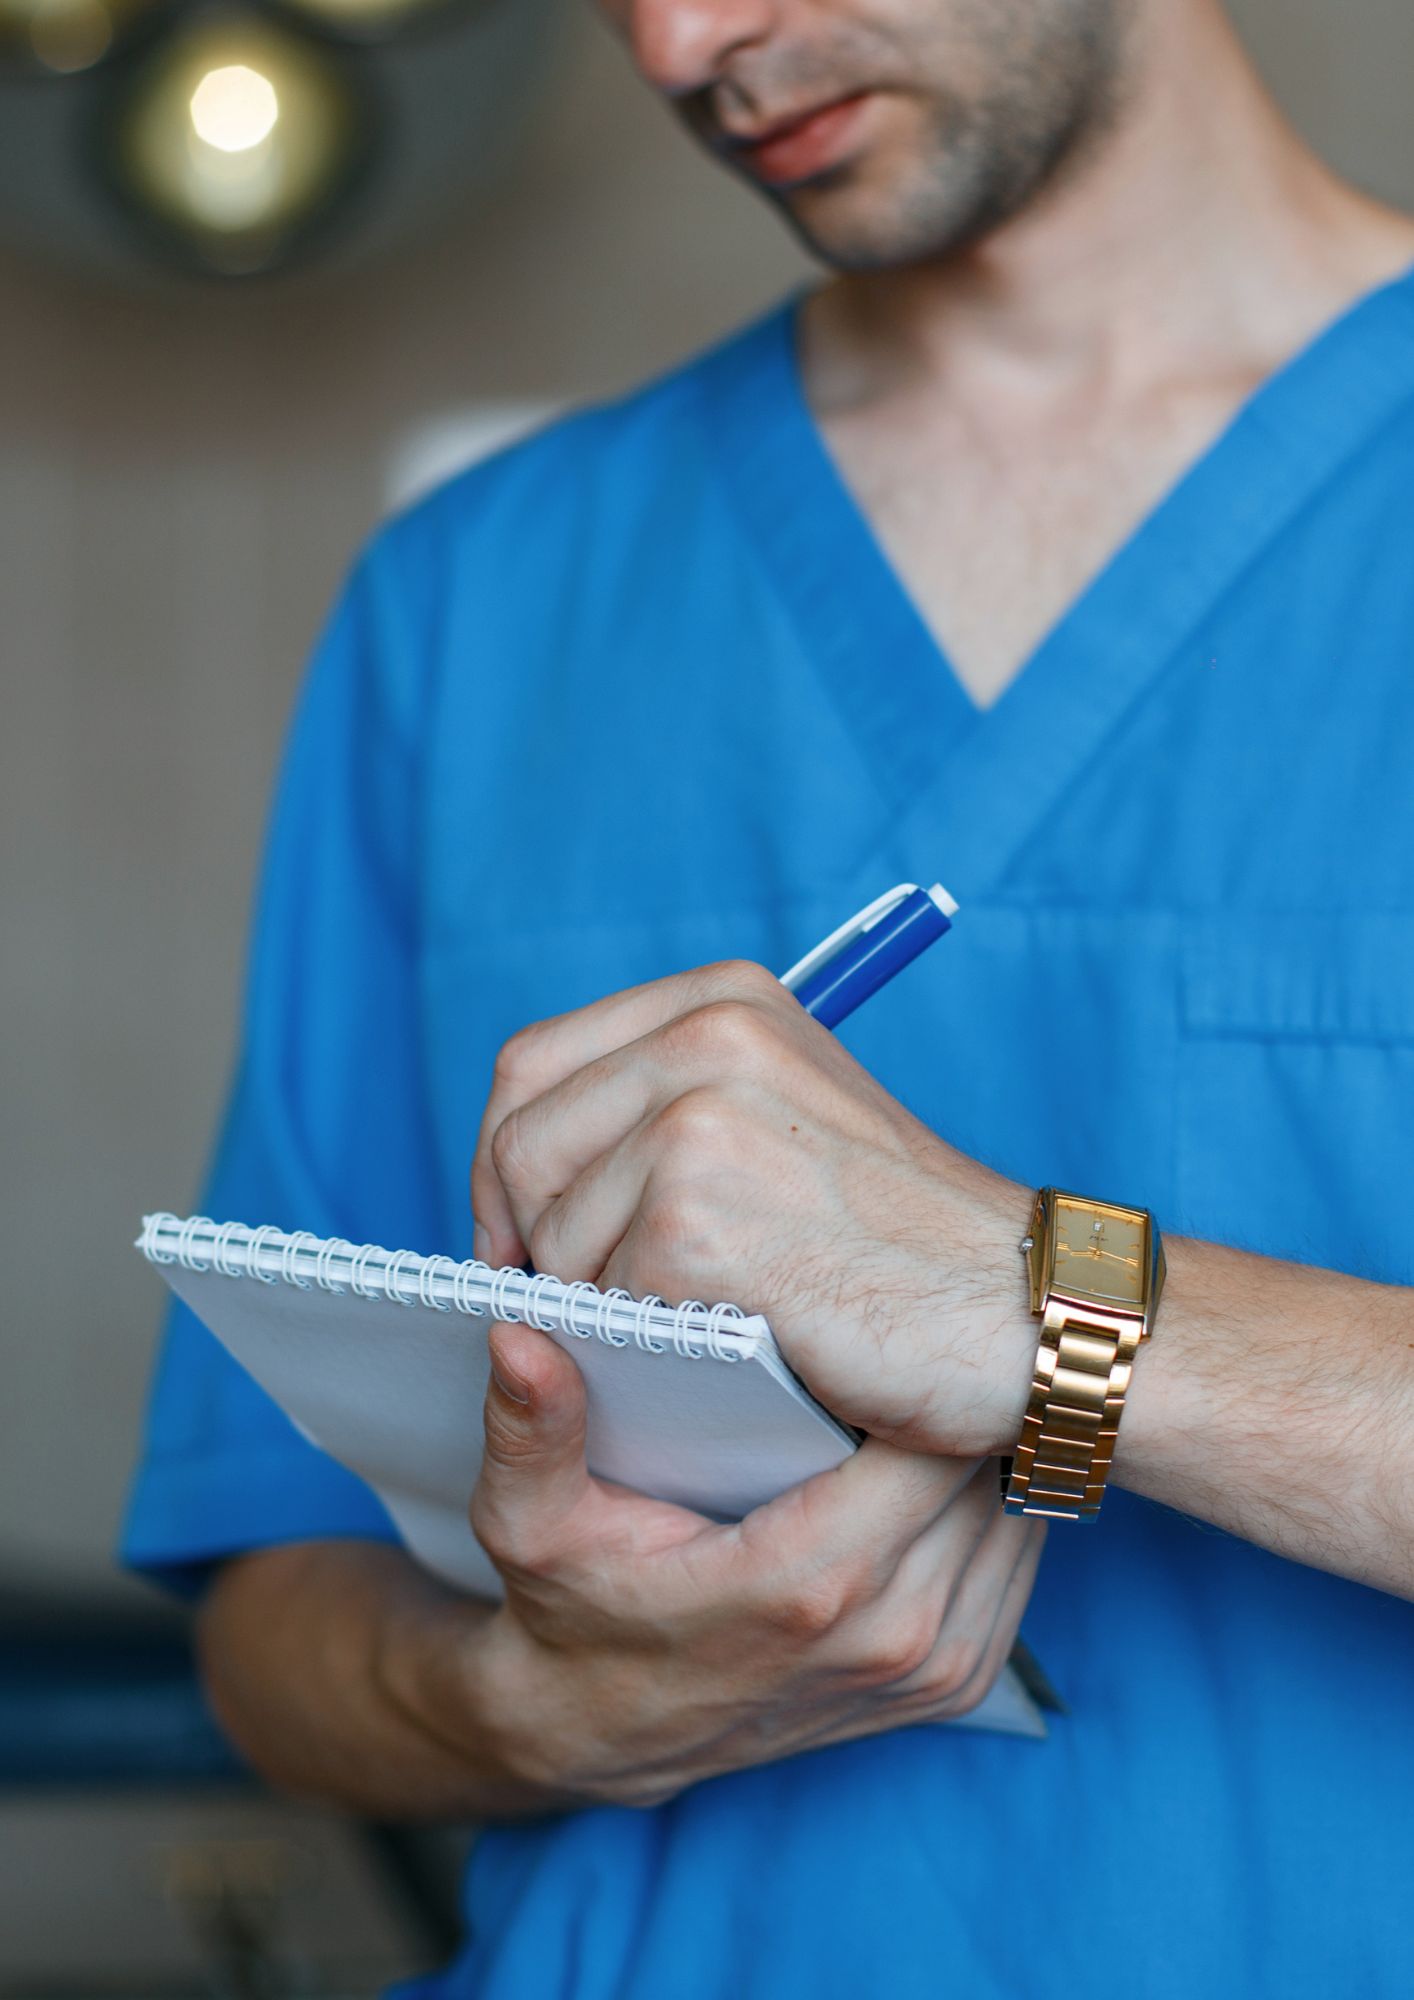 What constitutes medical malpractice in Maryland?